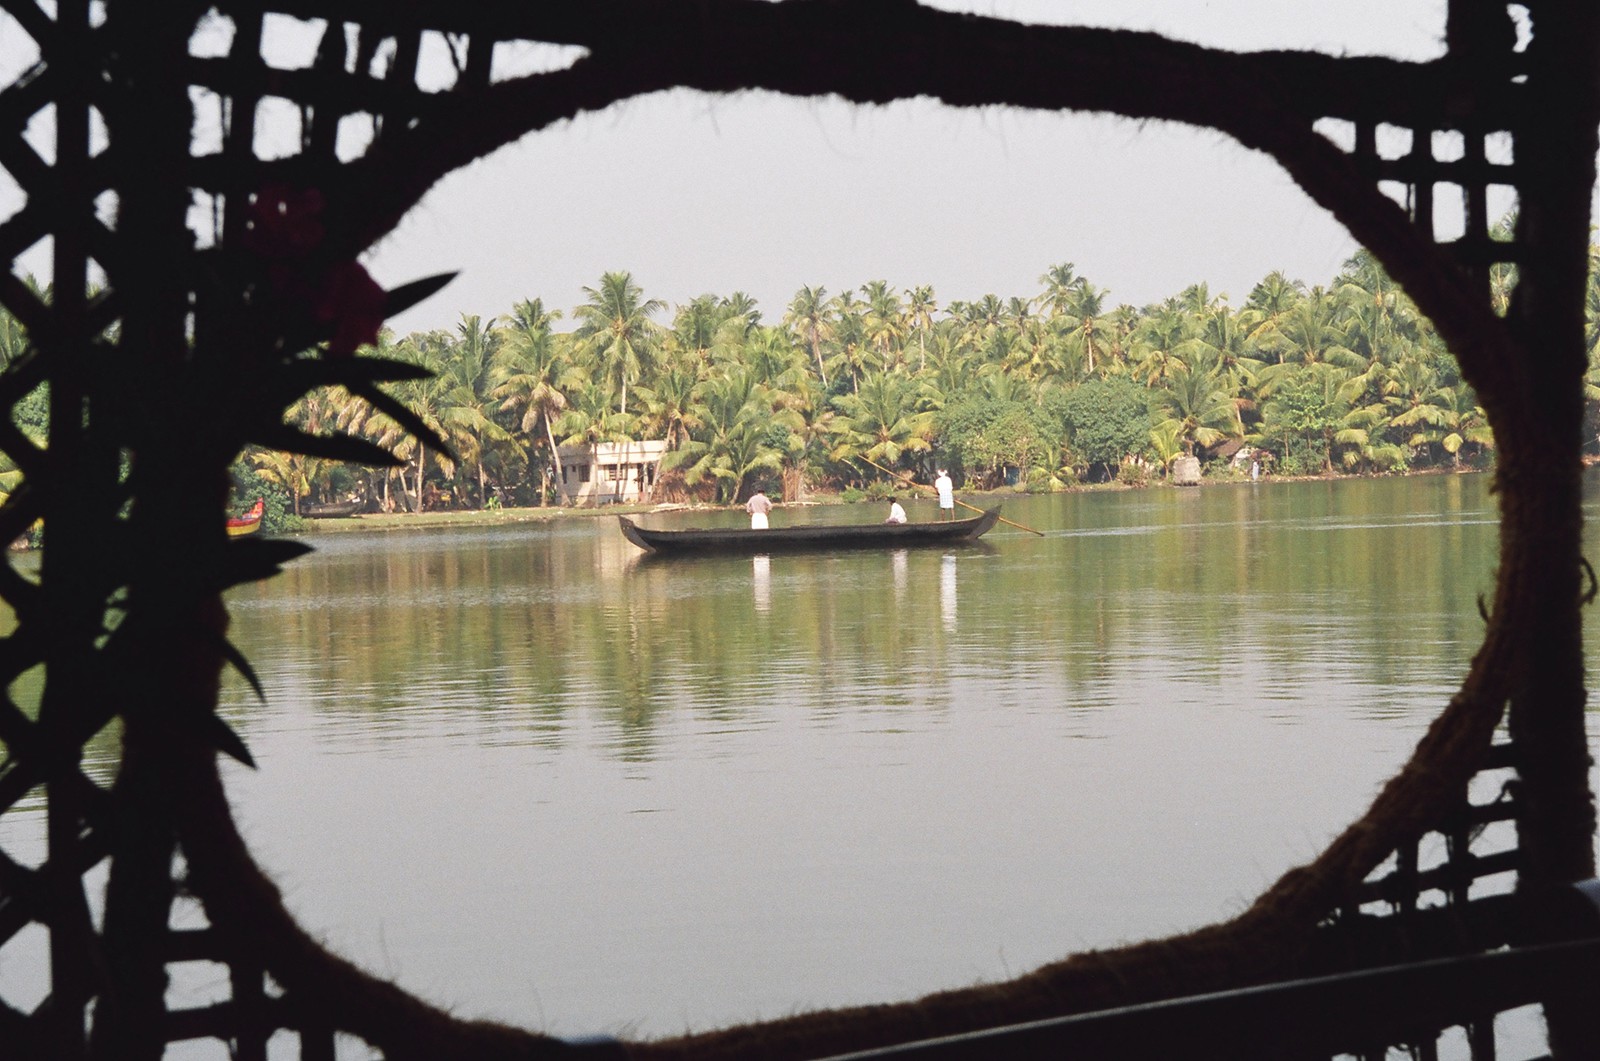 A river taxi ferrying locals across the backwaters